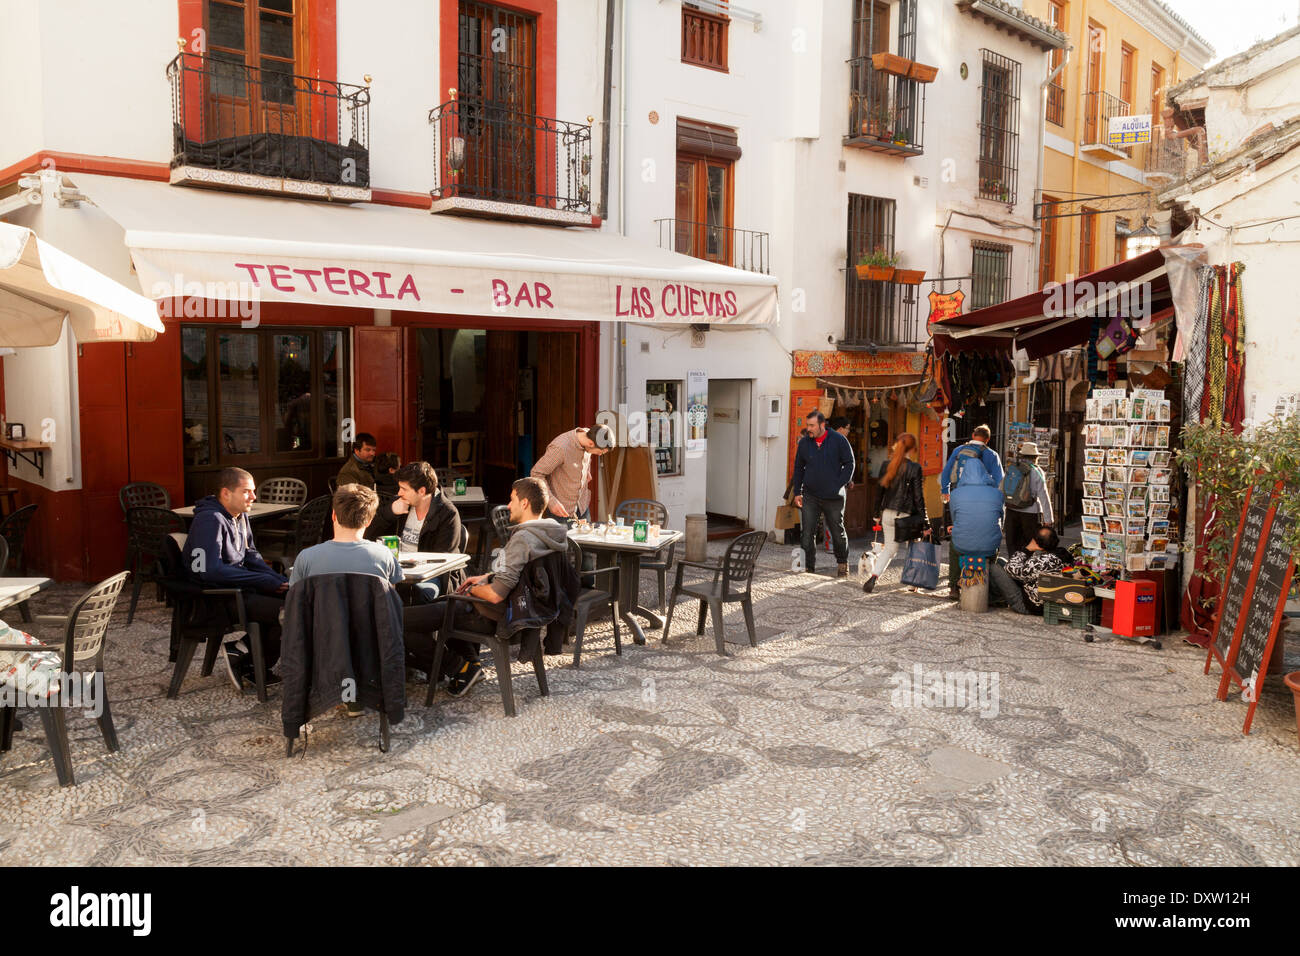 People drinking at a bar, Granada, Andalusia, Spain Europe Stock Photo